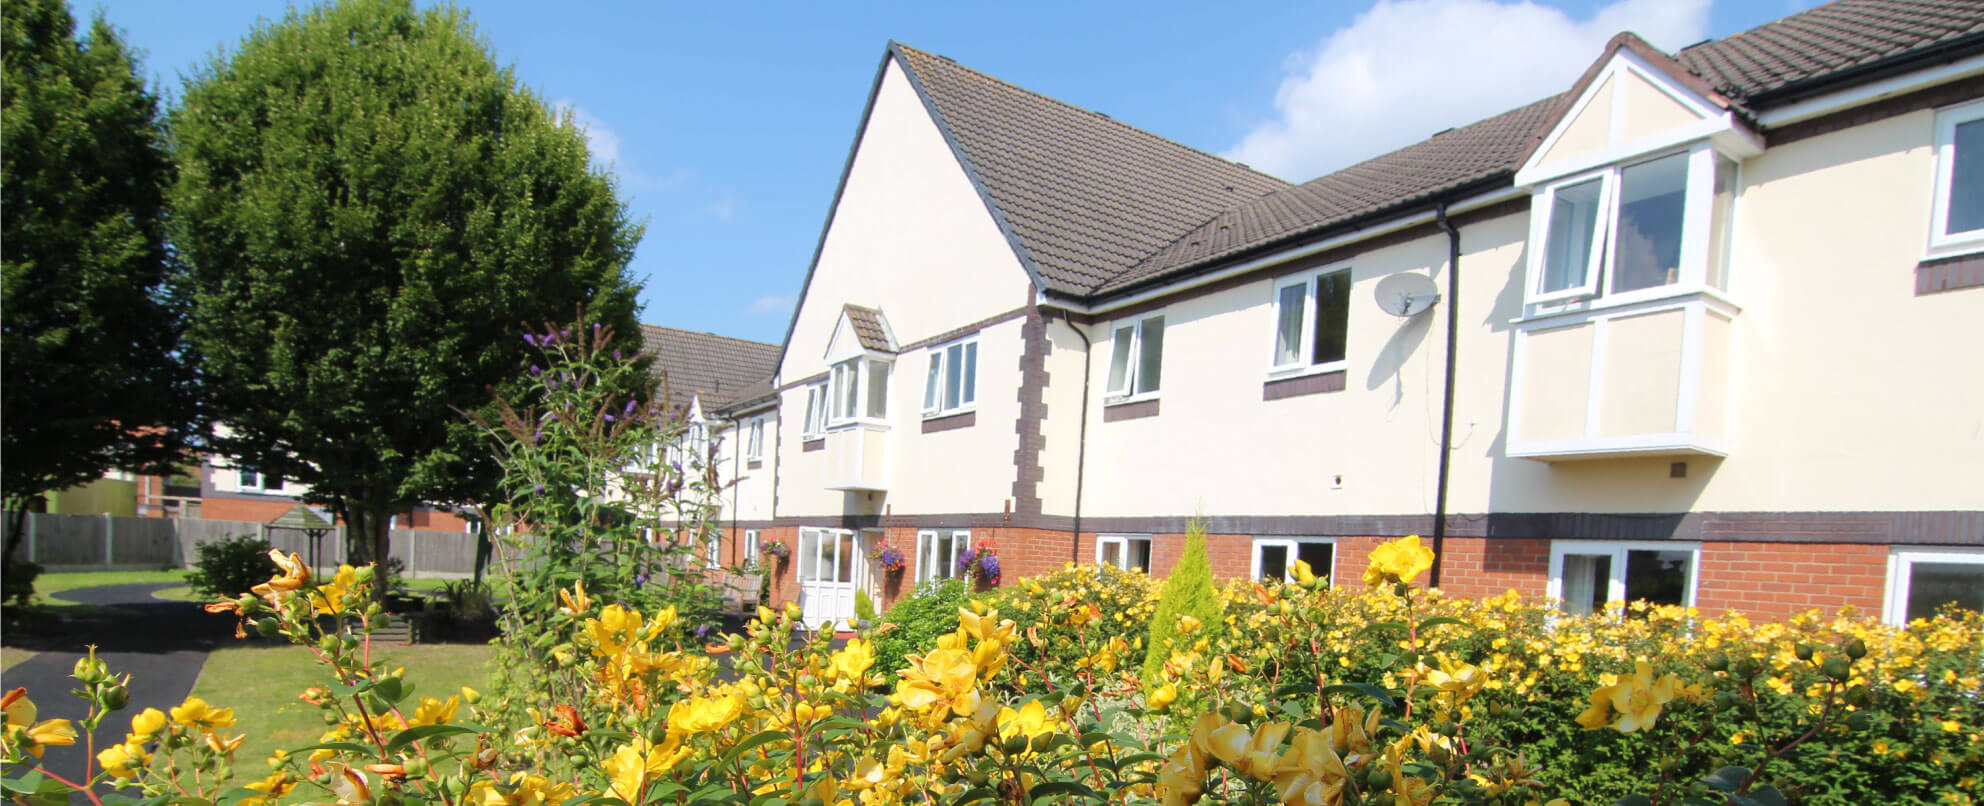 St George's Park Care Home in Telford